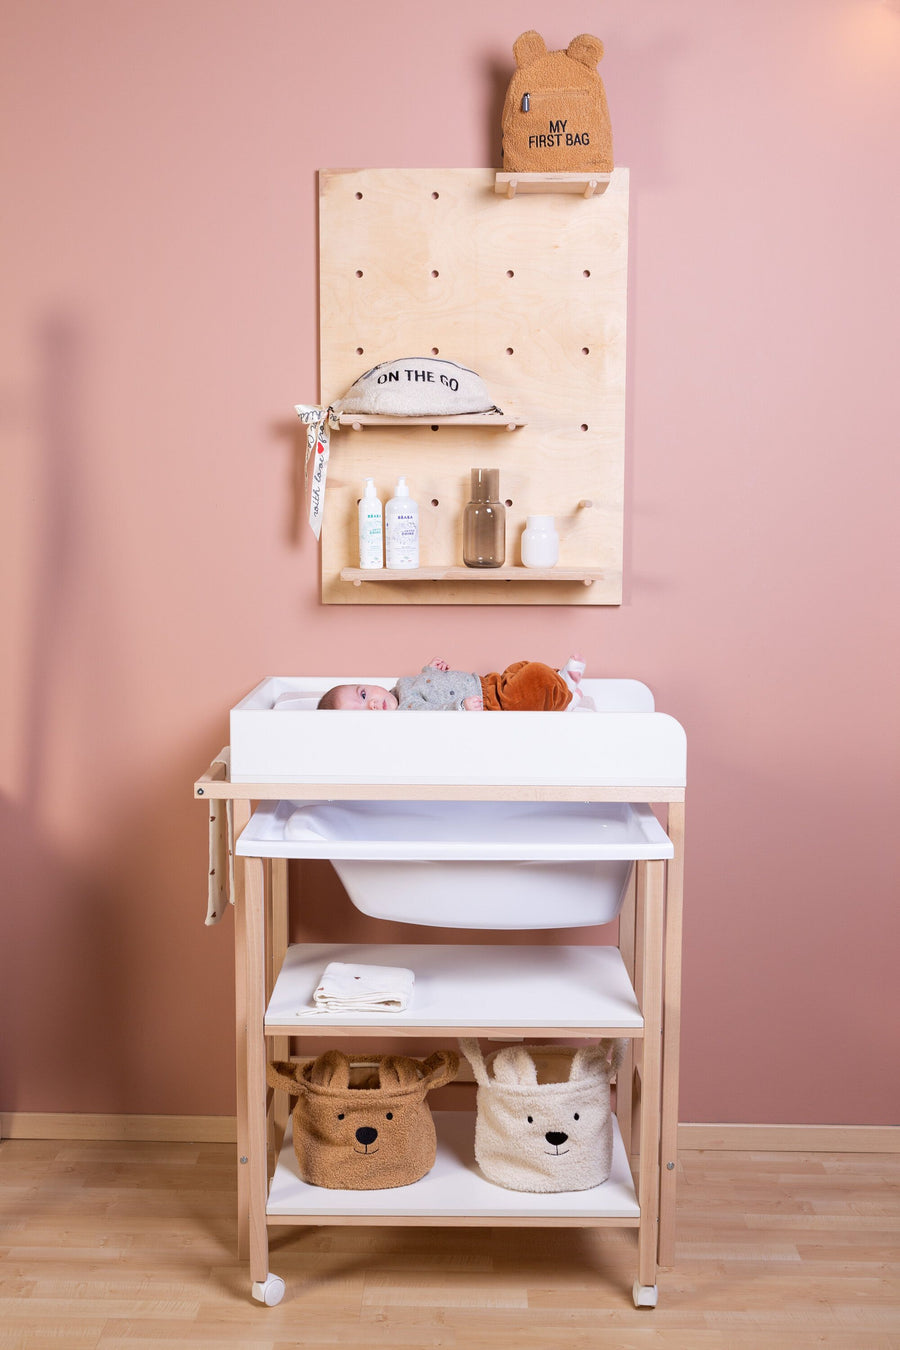 Changing table + Bathtub with wheels - Childhome 